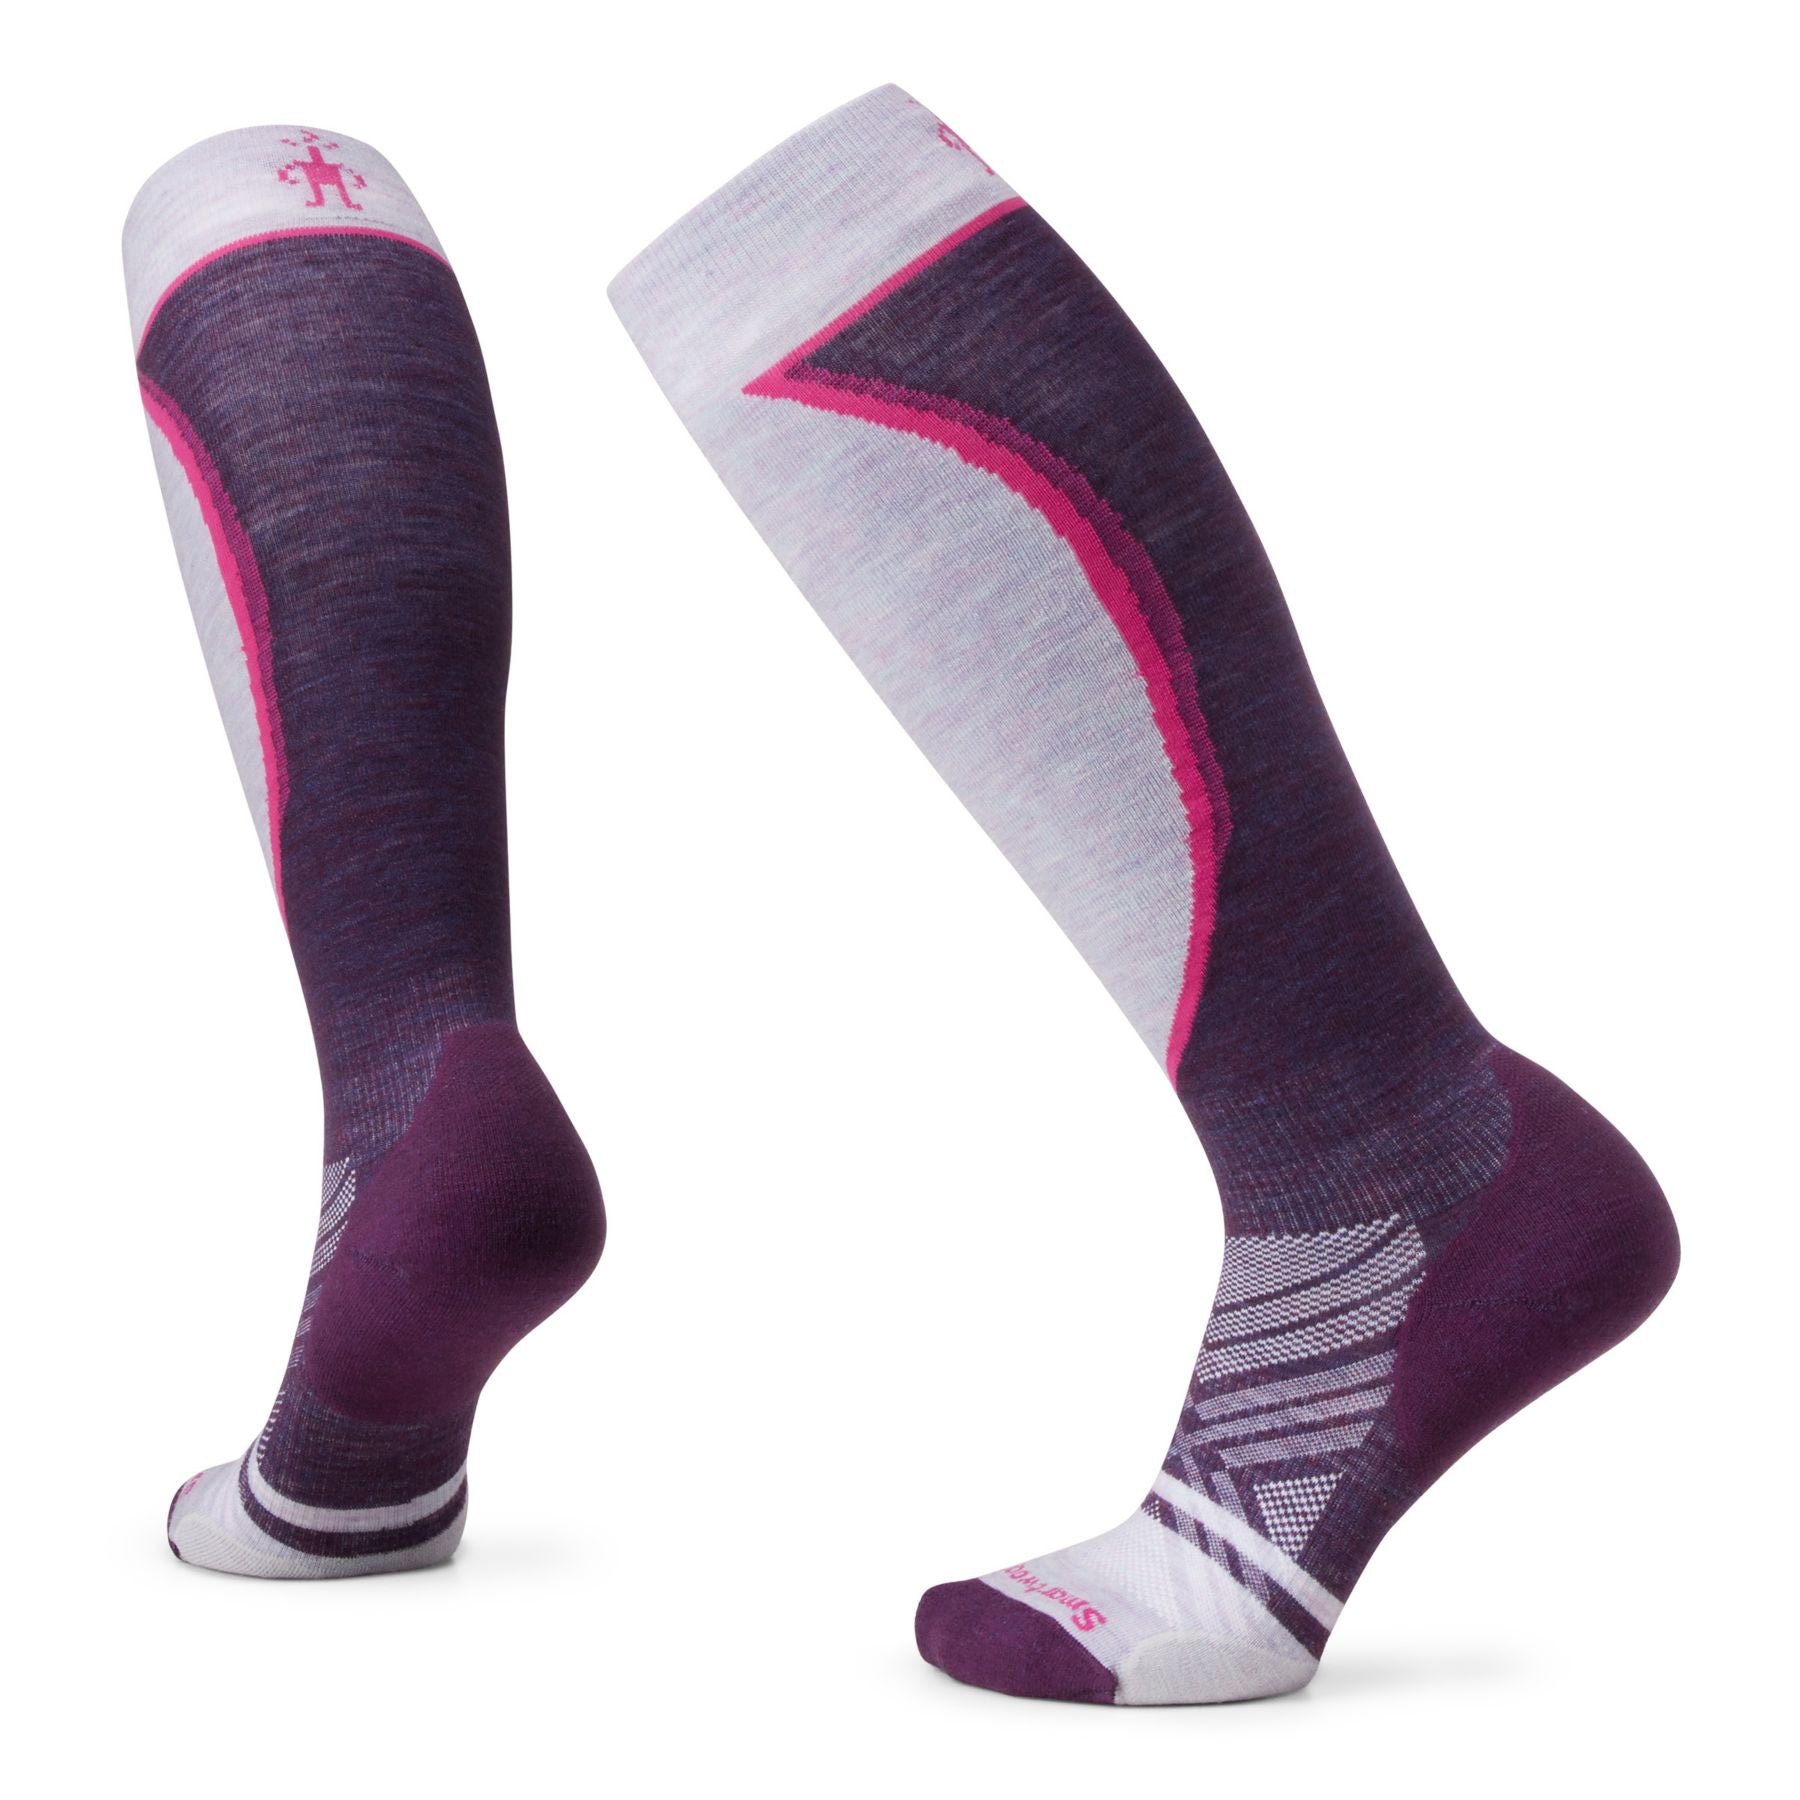 Smartwool Women's Ski Targeted Cushion Over The Calf Socks Apparel Smartwool Bordeaux-590 Small 